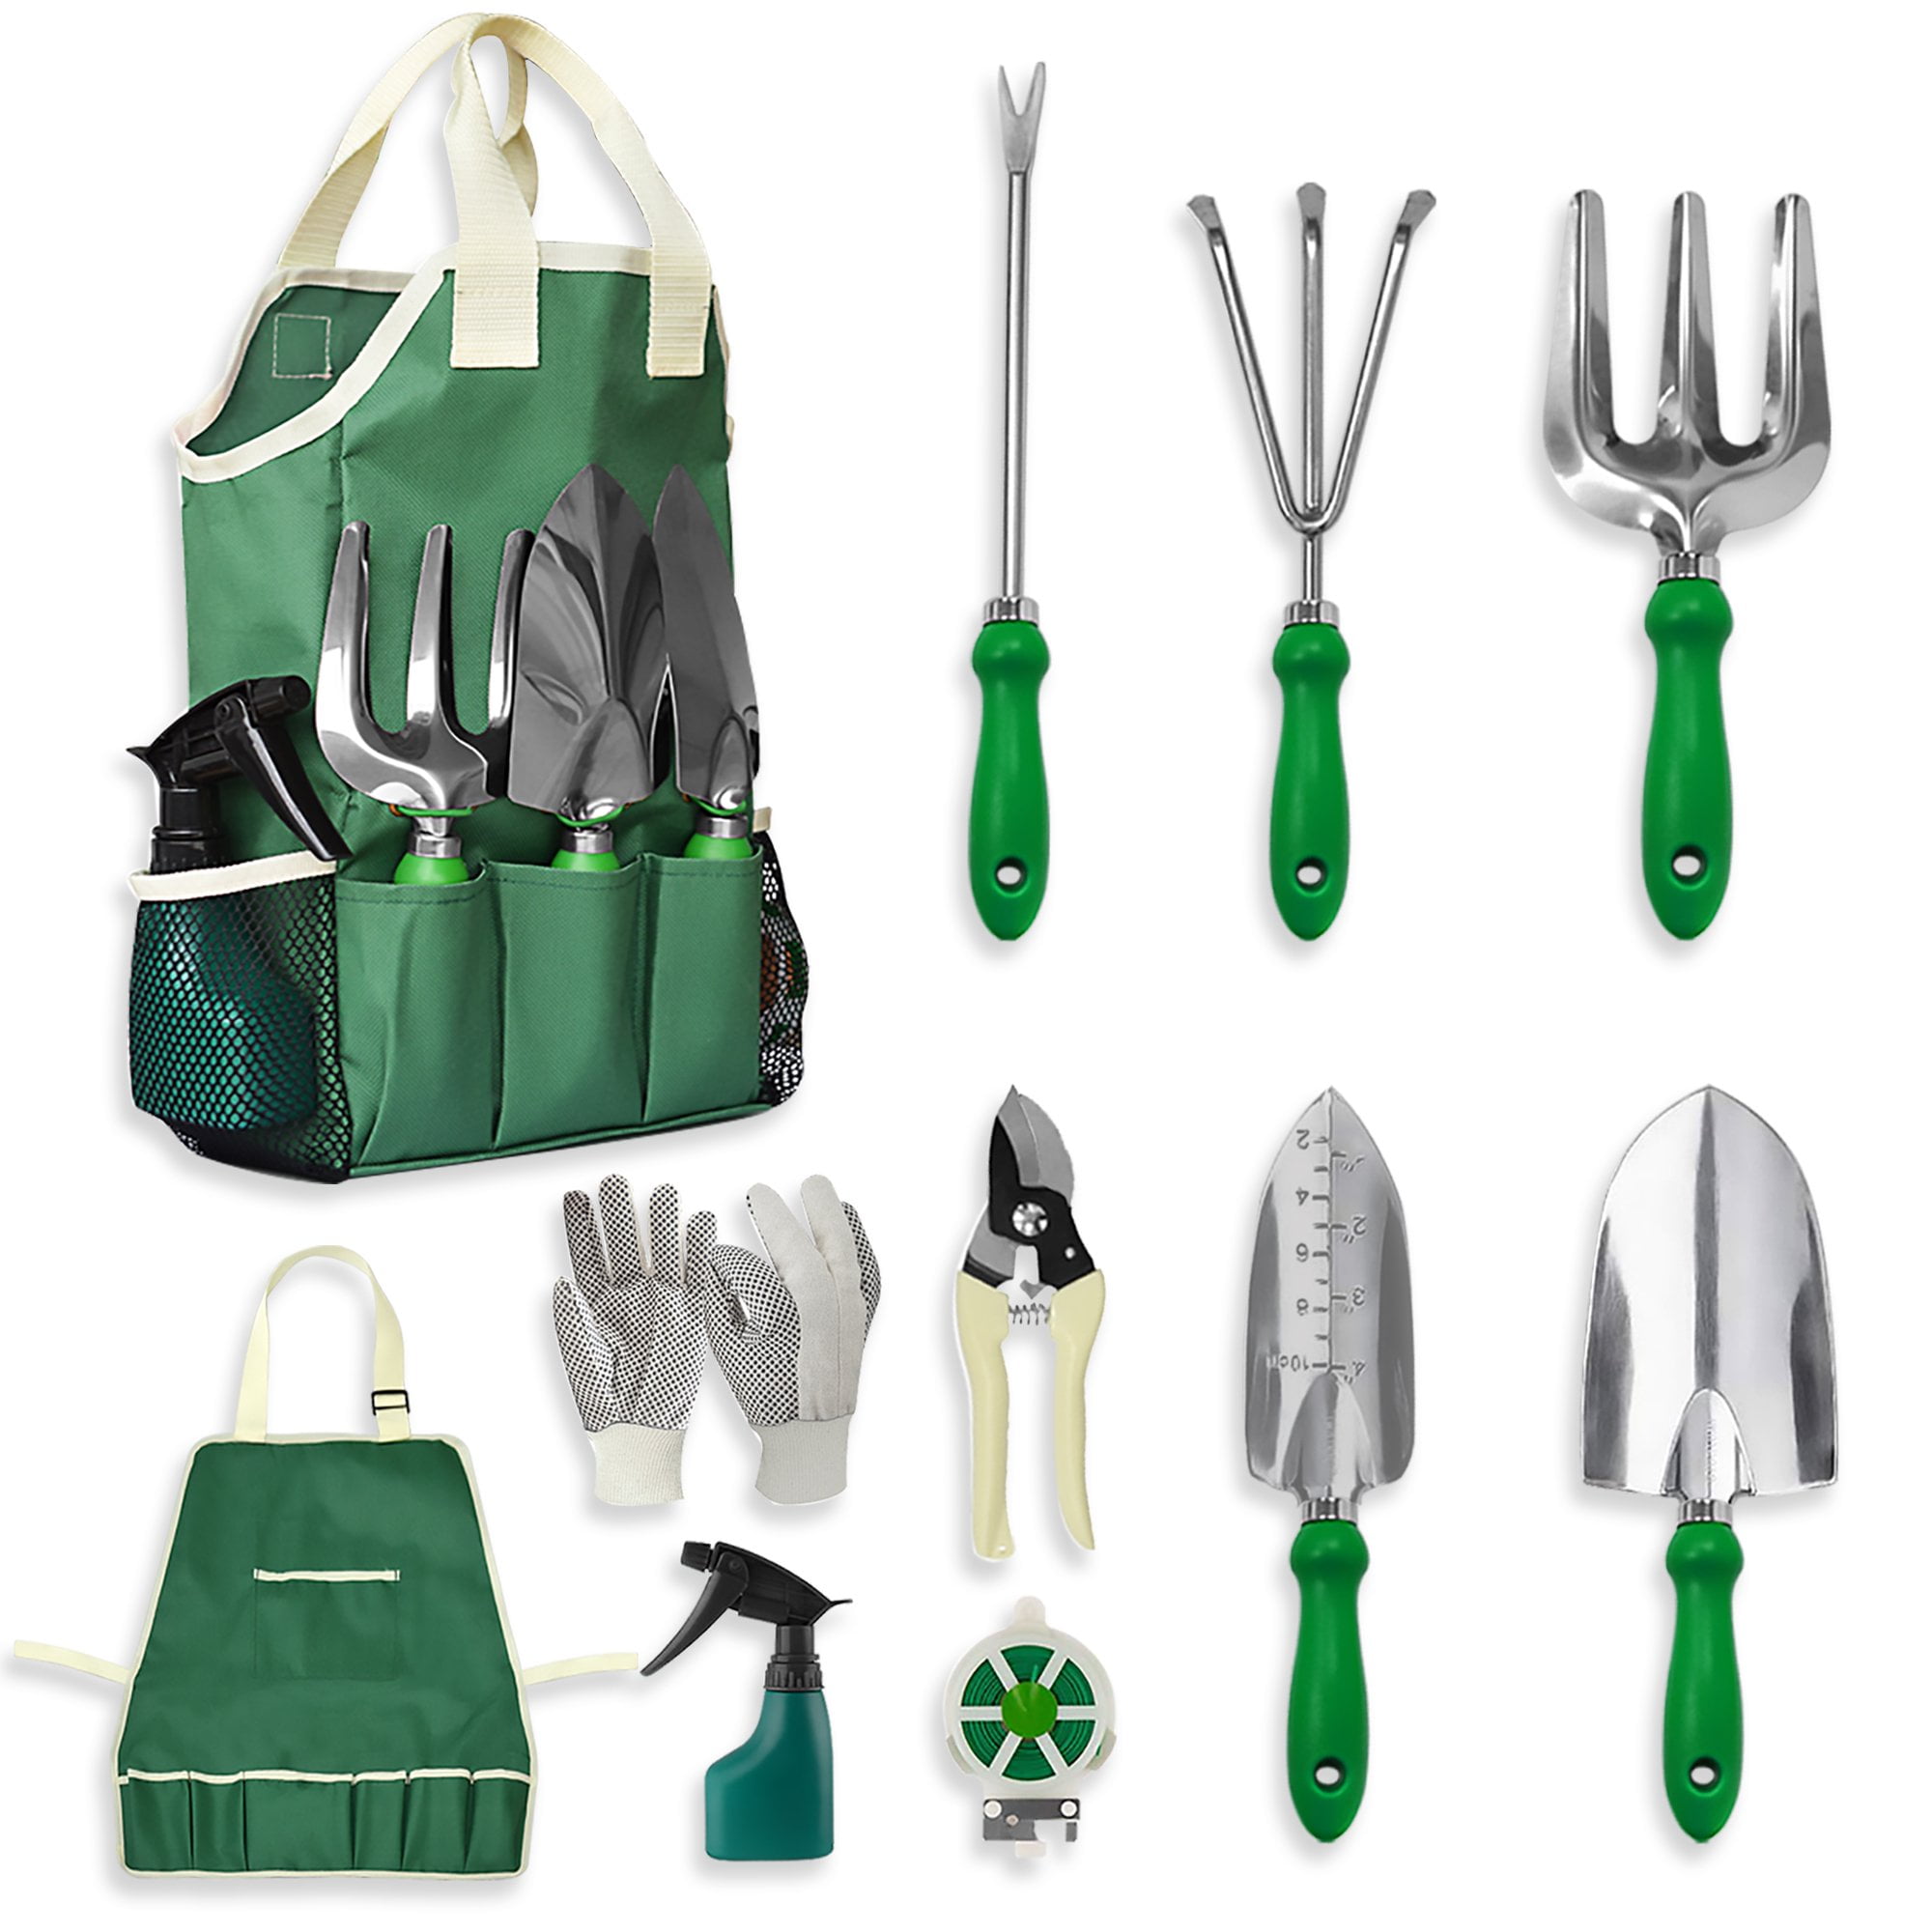 Pruning Shear and 7... Wellmax Garden Tools Set of 12 with Gardening Gloves 